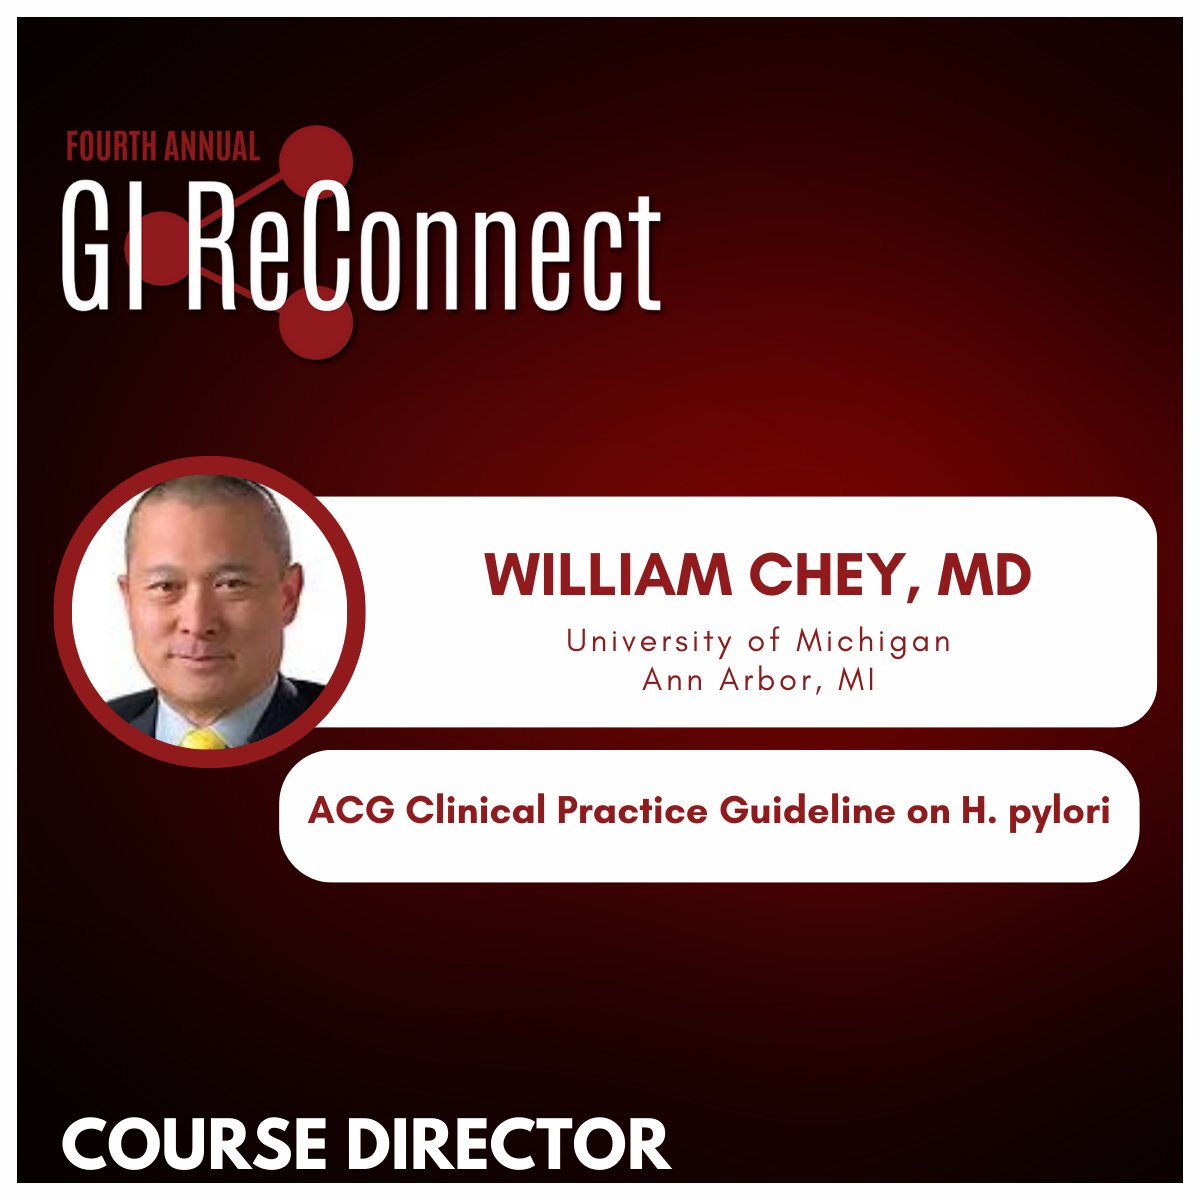 GiHF is pleased to showcase the course directors for this year's GI ReConnect conference! Our latest initiative offers detailed, educational insights with up-to-date information on gastrointestinal health. Registration is still live at gireconnect.org.